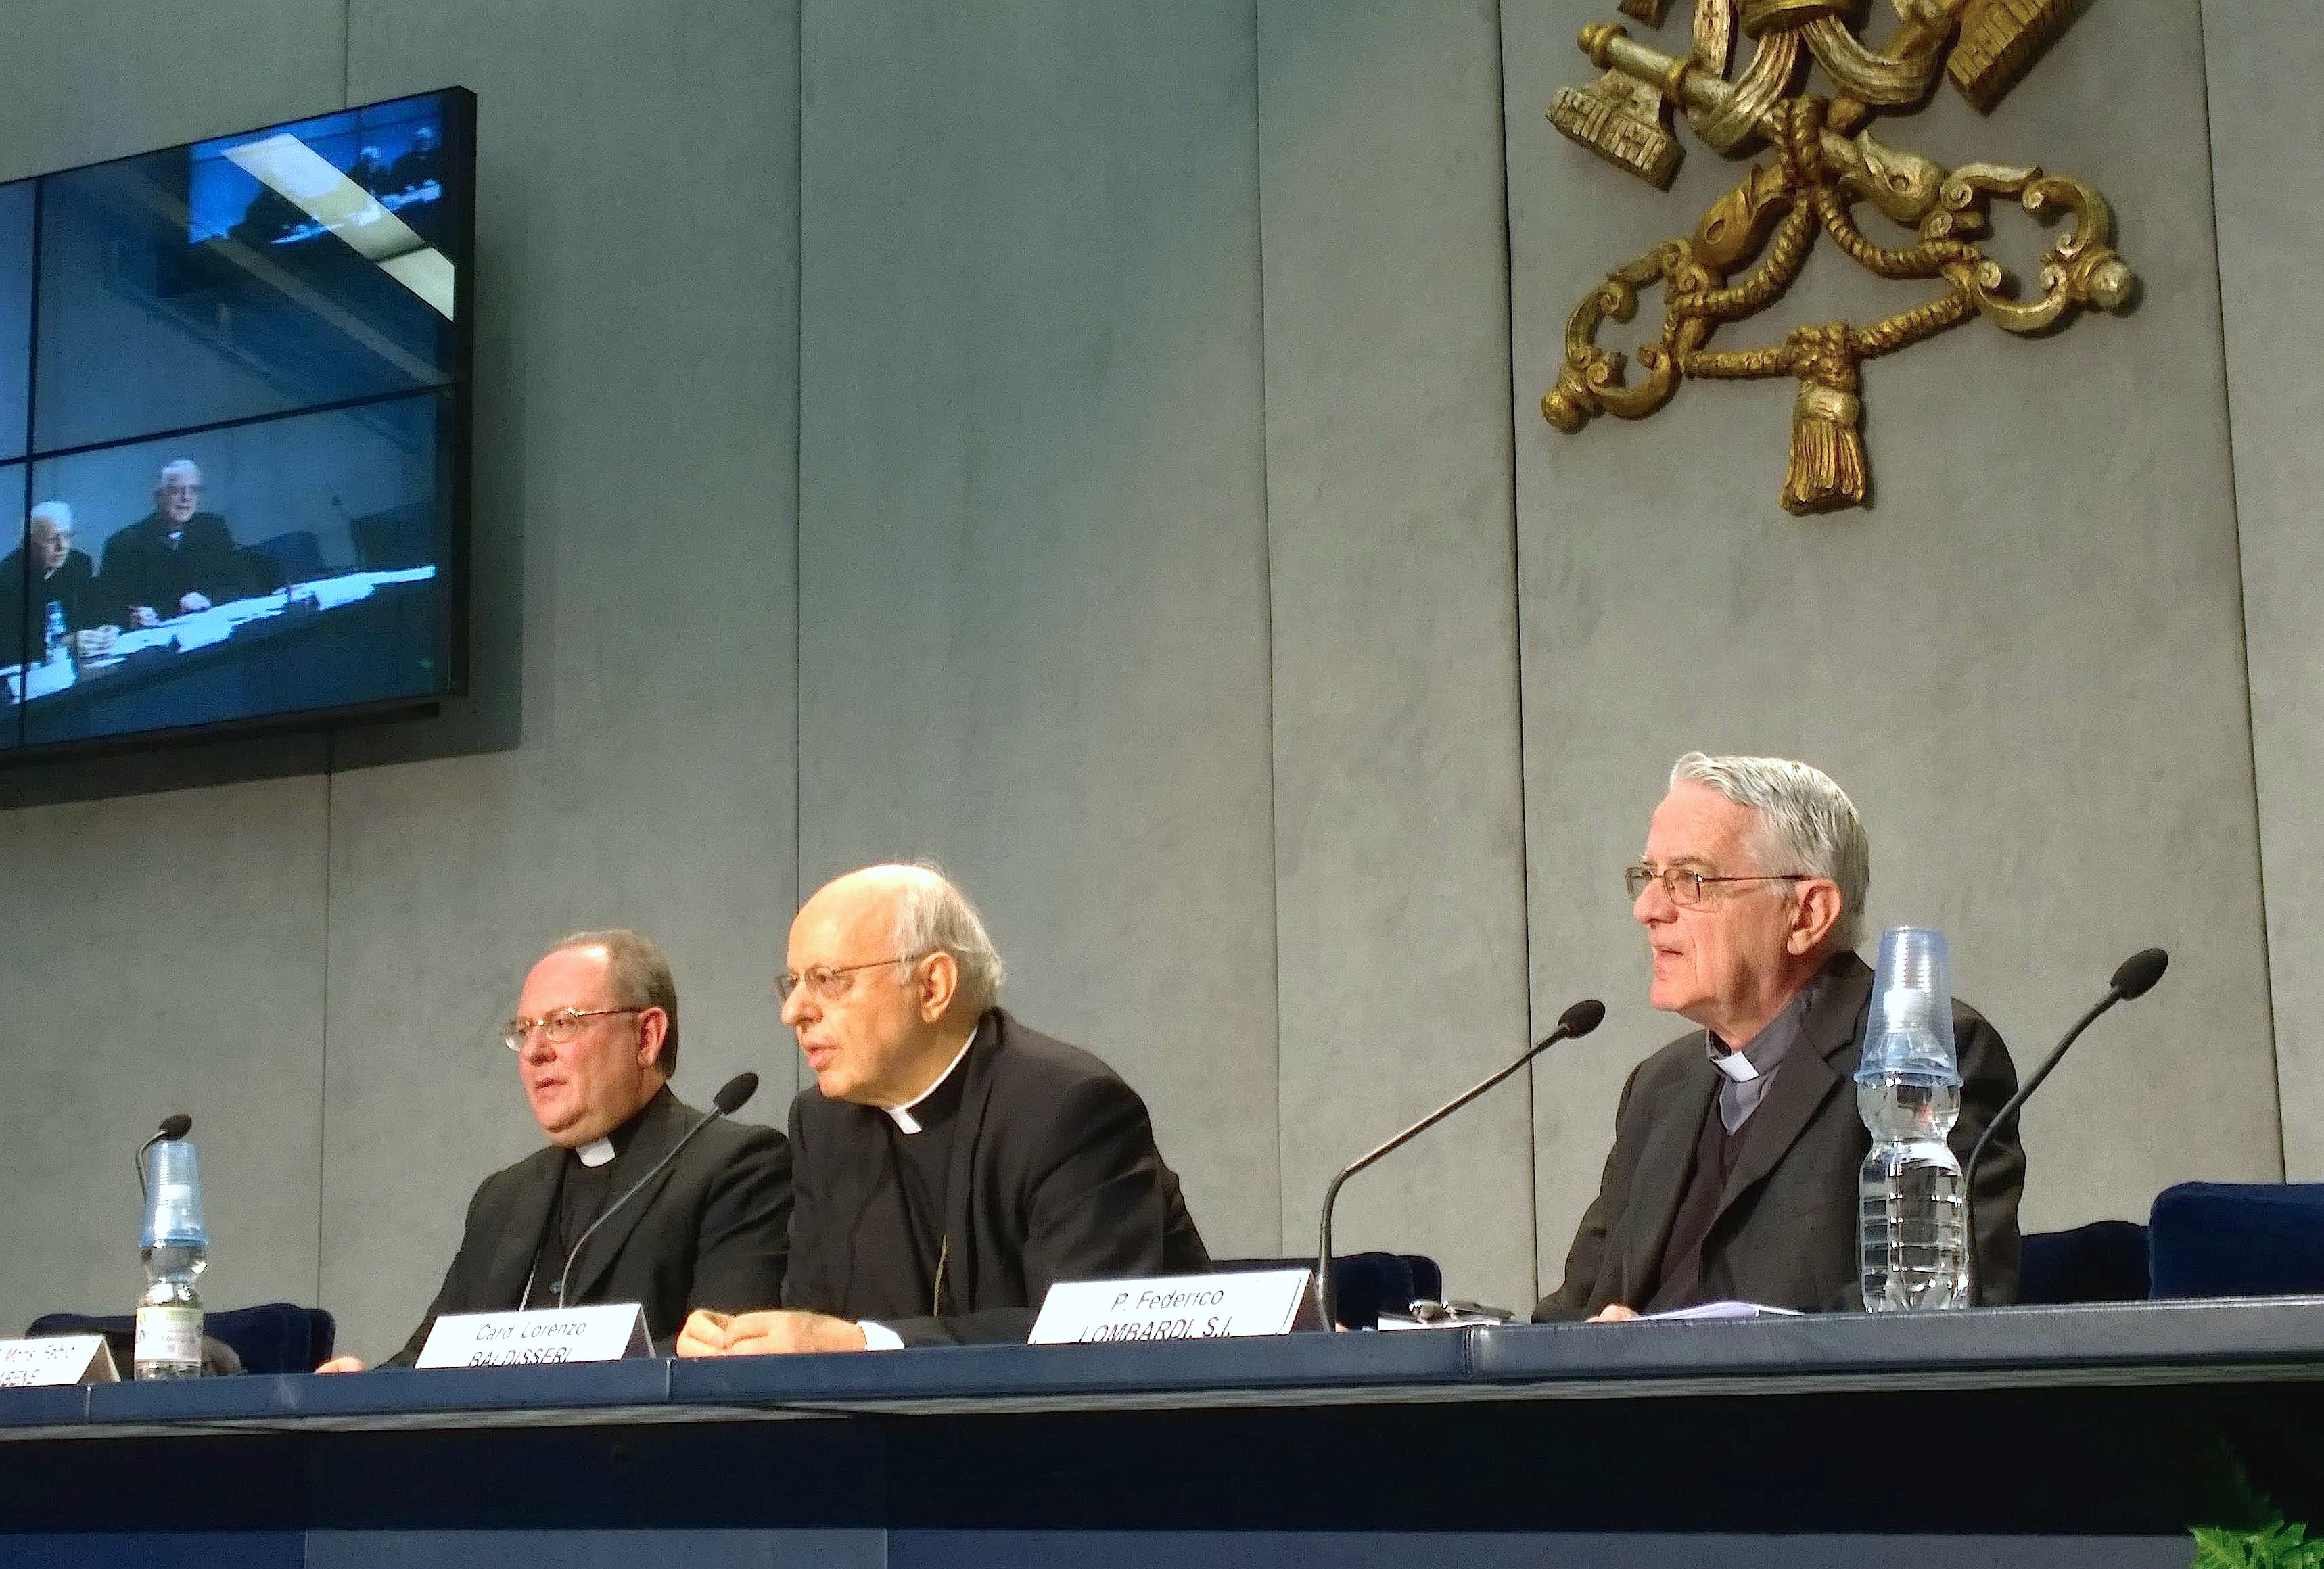 Cardinal Baldisseri during the presentation of the Synod of family - 2 October 2015